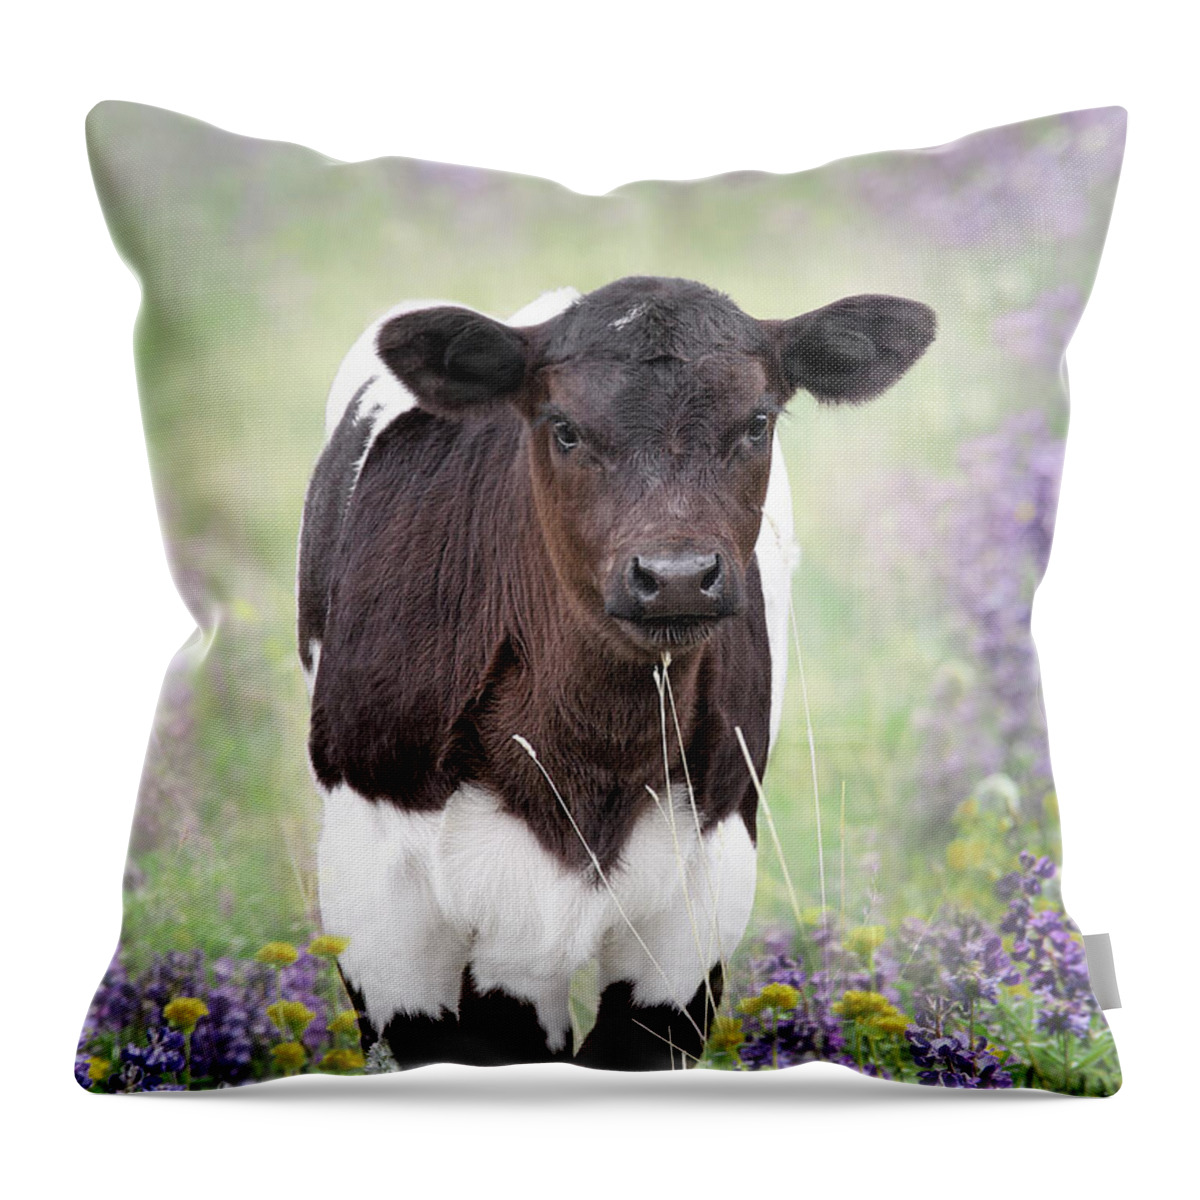 Calf Throw Pillow featuring the photograph Calf in the Lupine Flowers by Jennie Marie Schell